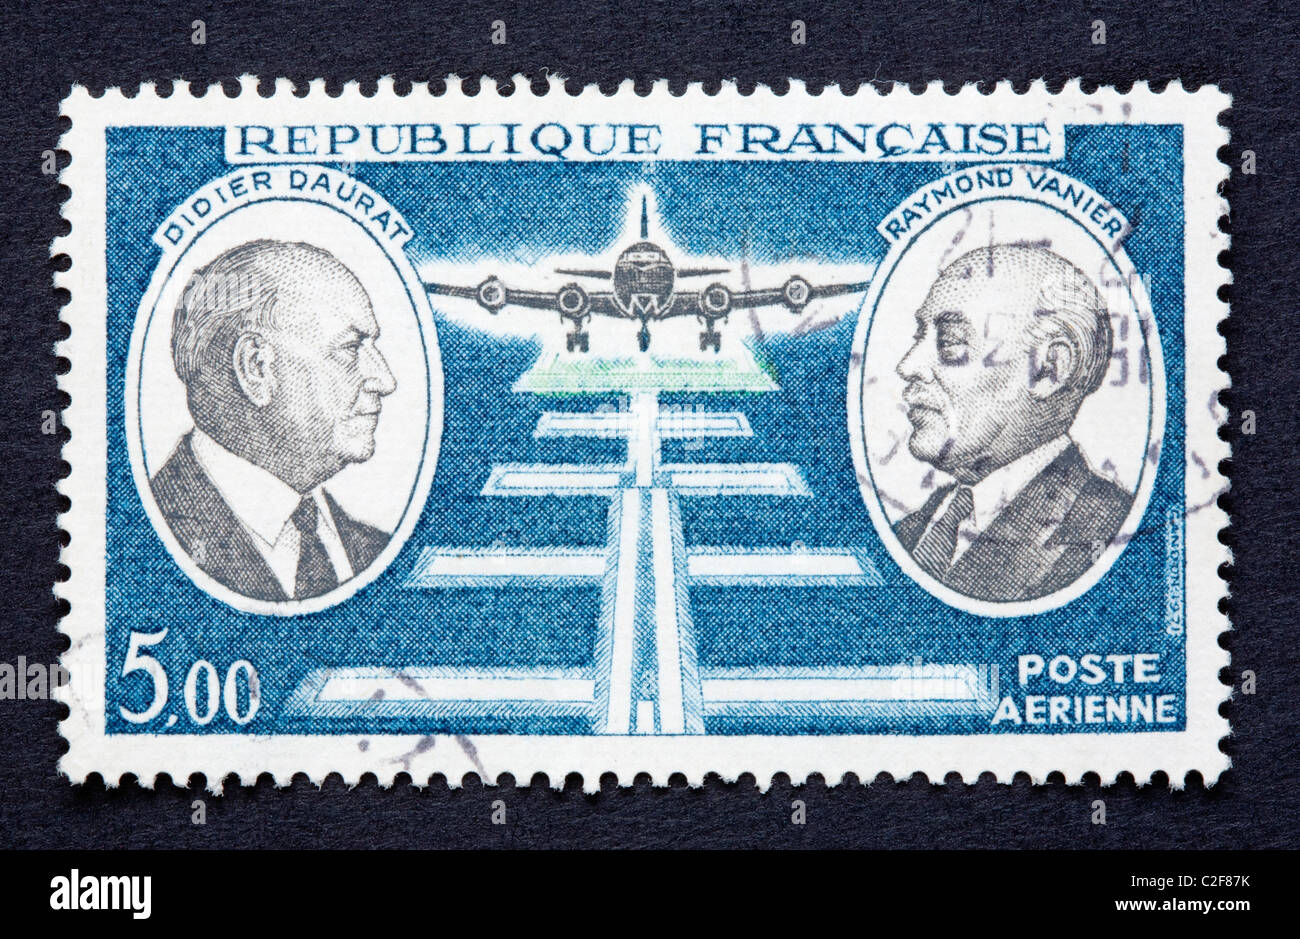 French postage stamp Stock Photo